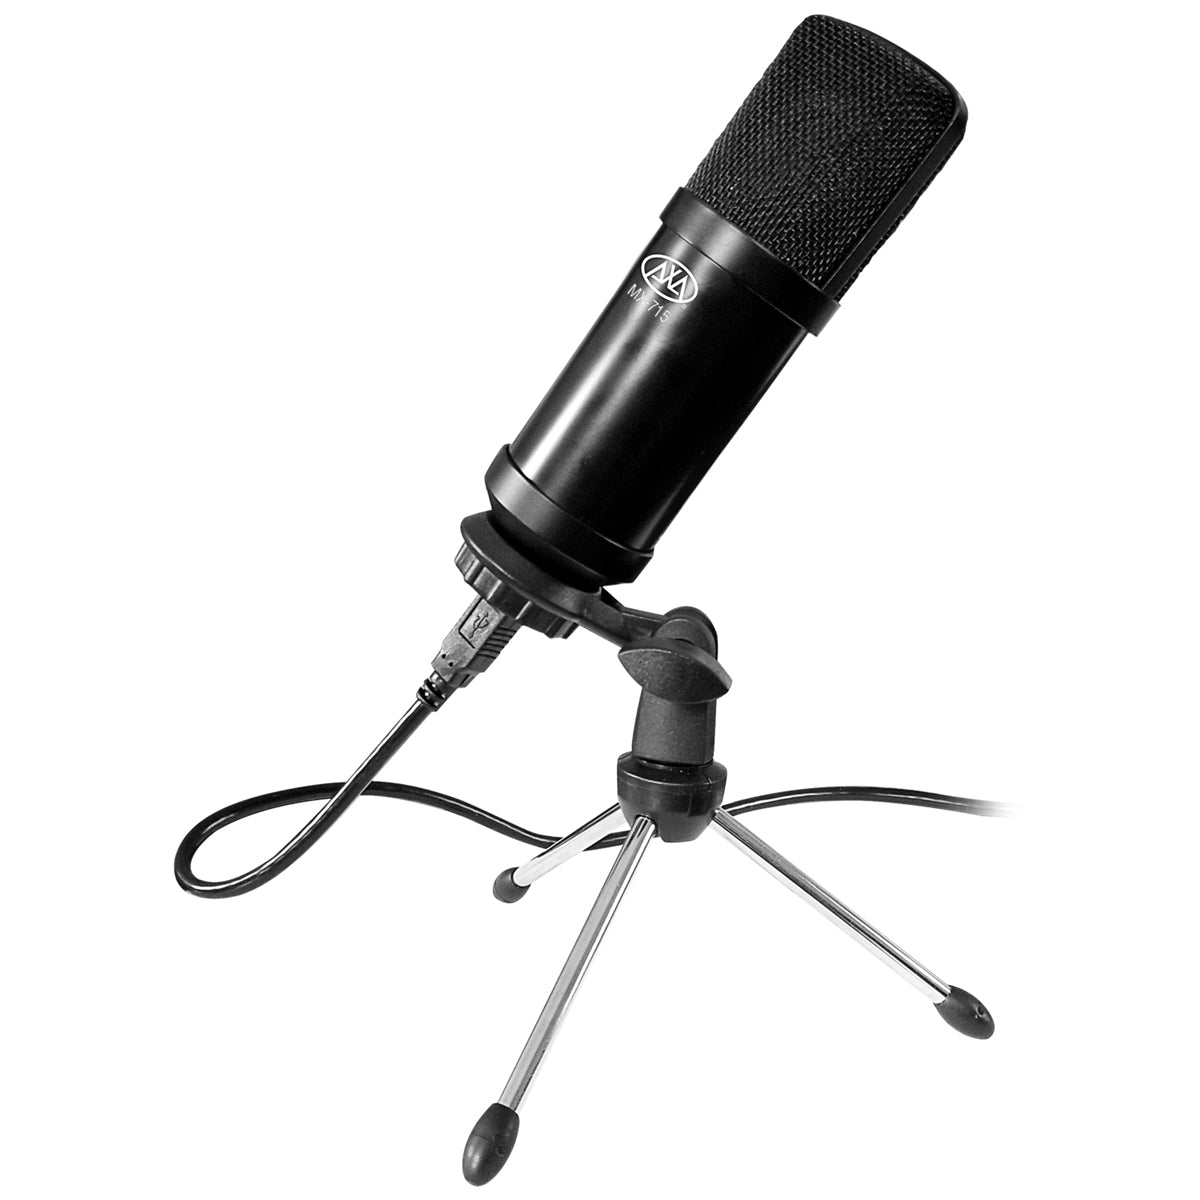 AxcessAbles MX-715 USB Studio Condenser Recording Microphone for PC Laptop MAC or Windows, Cardioid Studio for Recording Vocals, Voice-Overs, Streaming Broadcasts and YouTube Videos